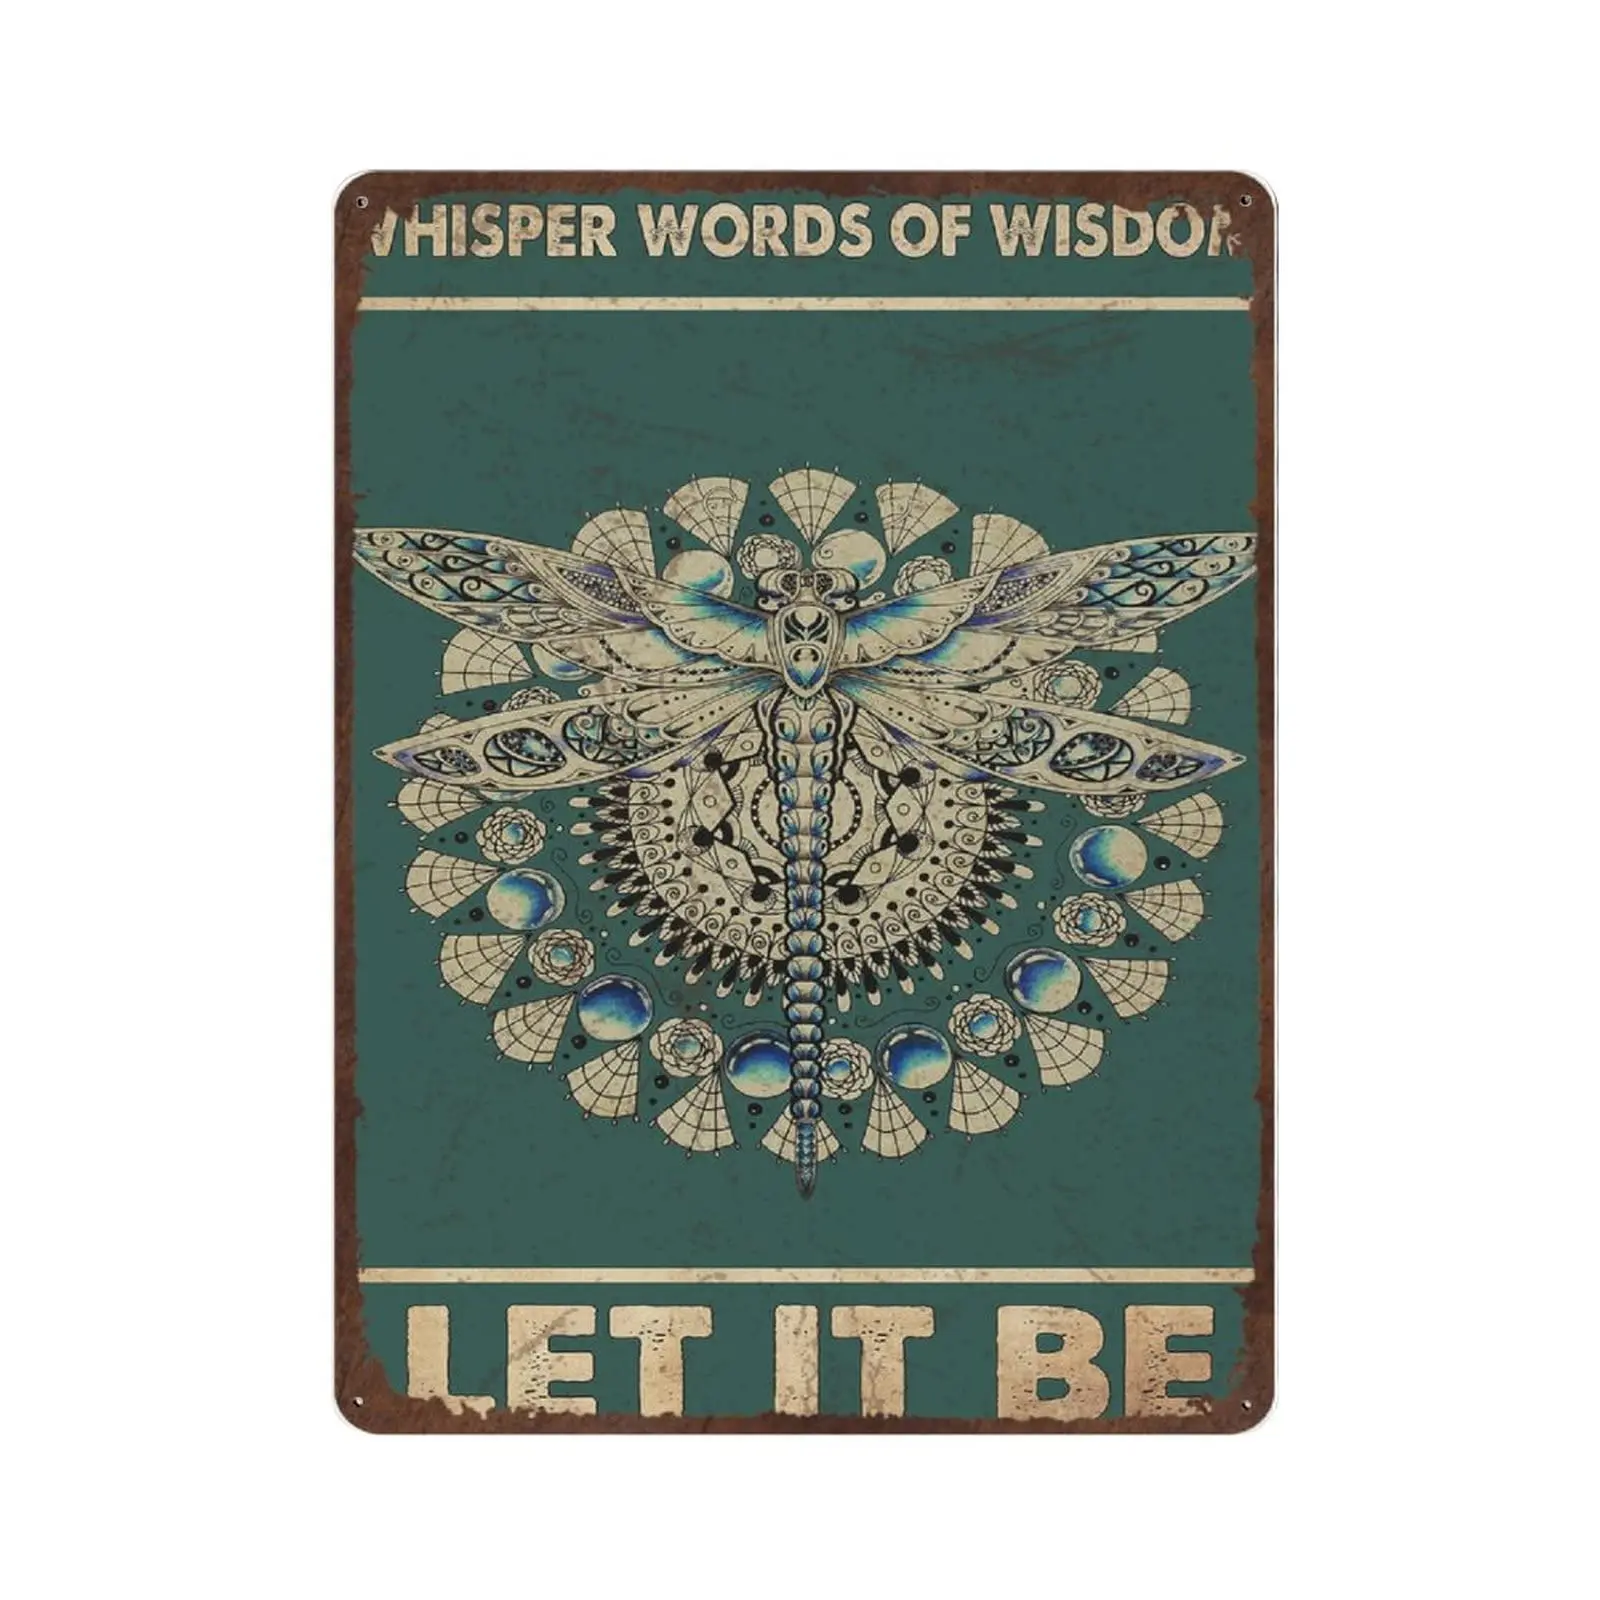 

Antique Durable Thick Metal Sign， Whisper Words of Wisdom Let It Be Dragonfly Tin Sign，Vintage Wall Decor，Novelty Signs for Home